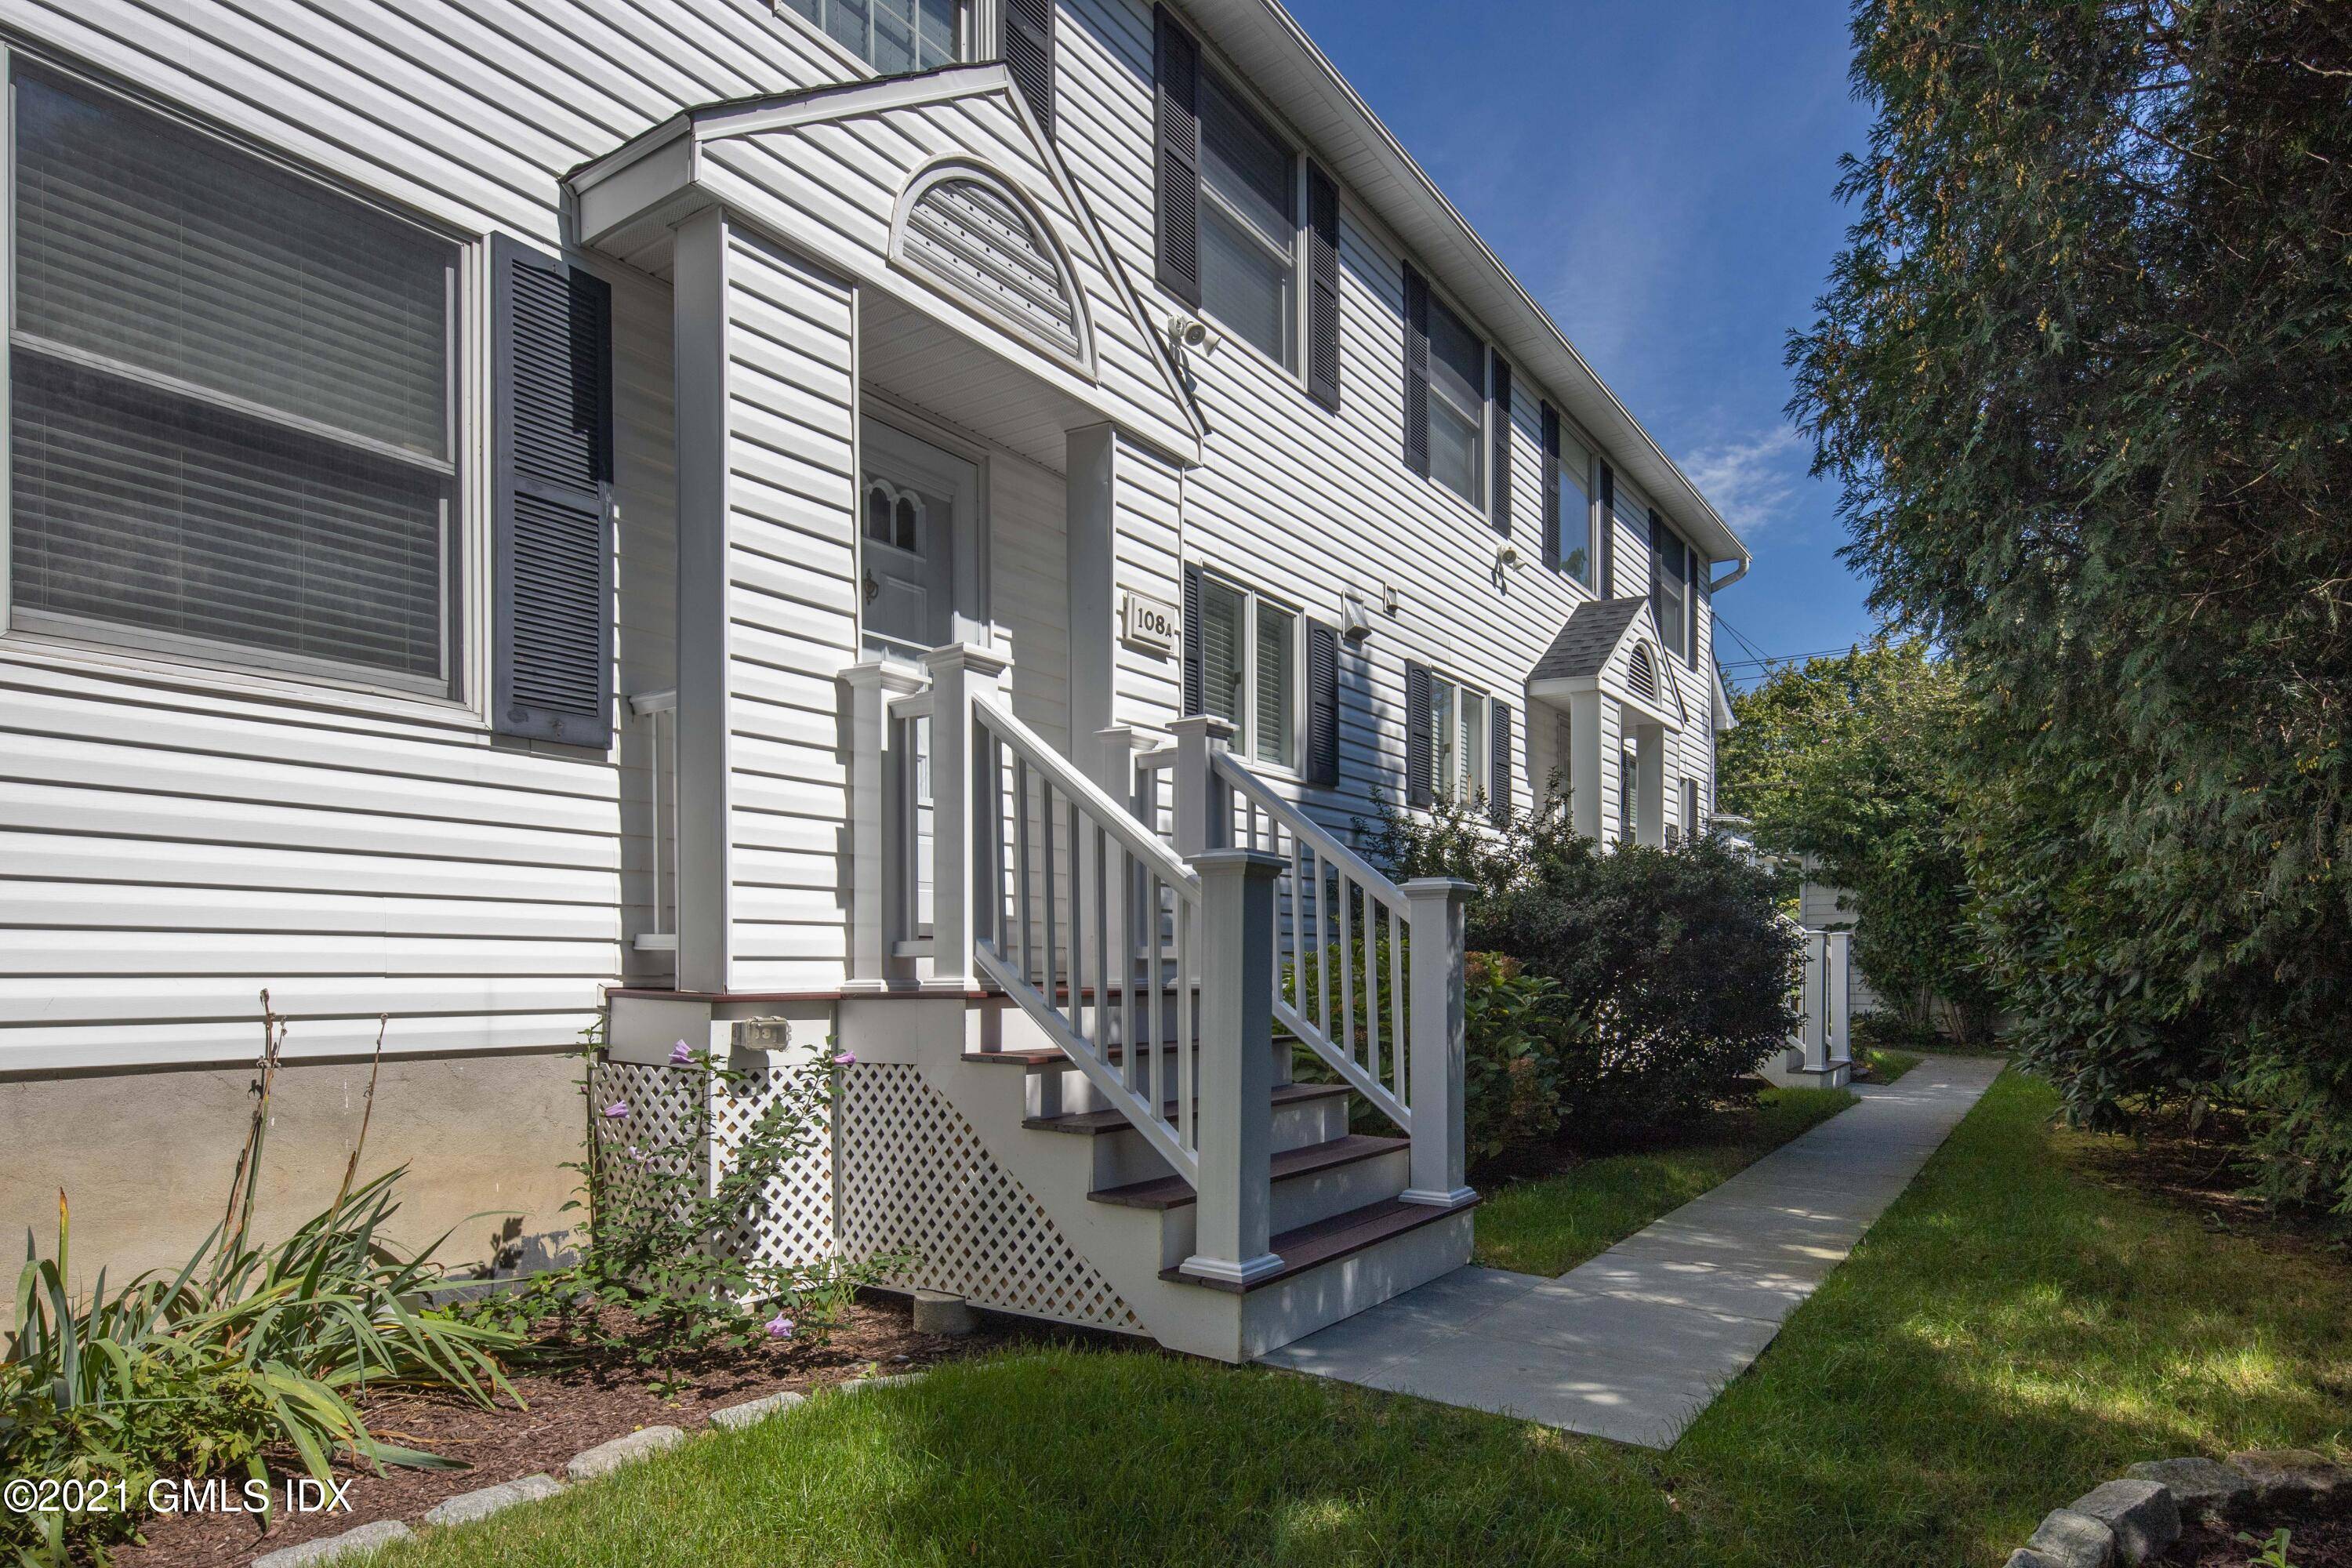 Private, end unit townhouse, offering 3 bedrooms and 2.